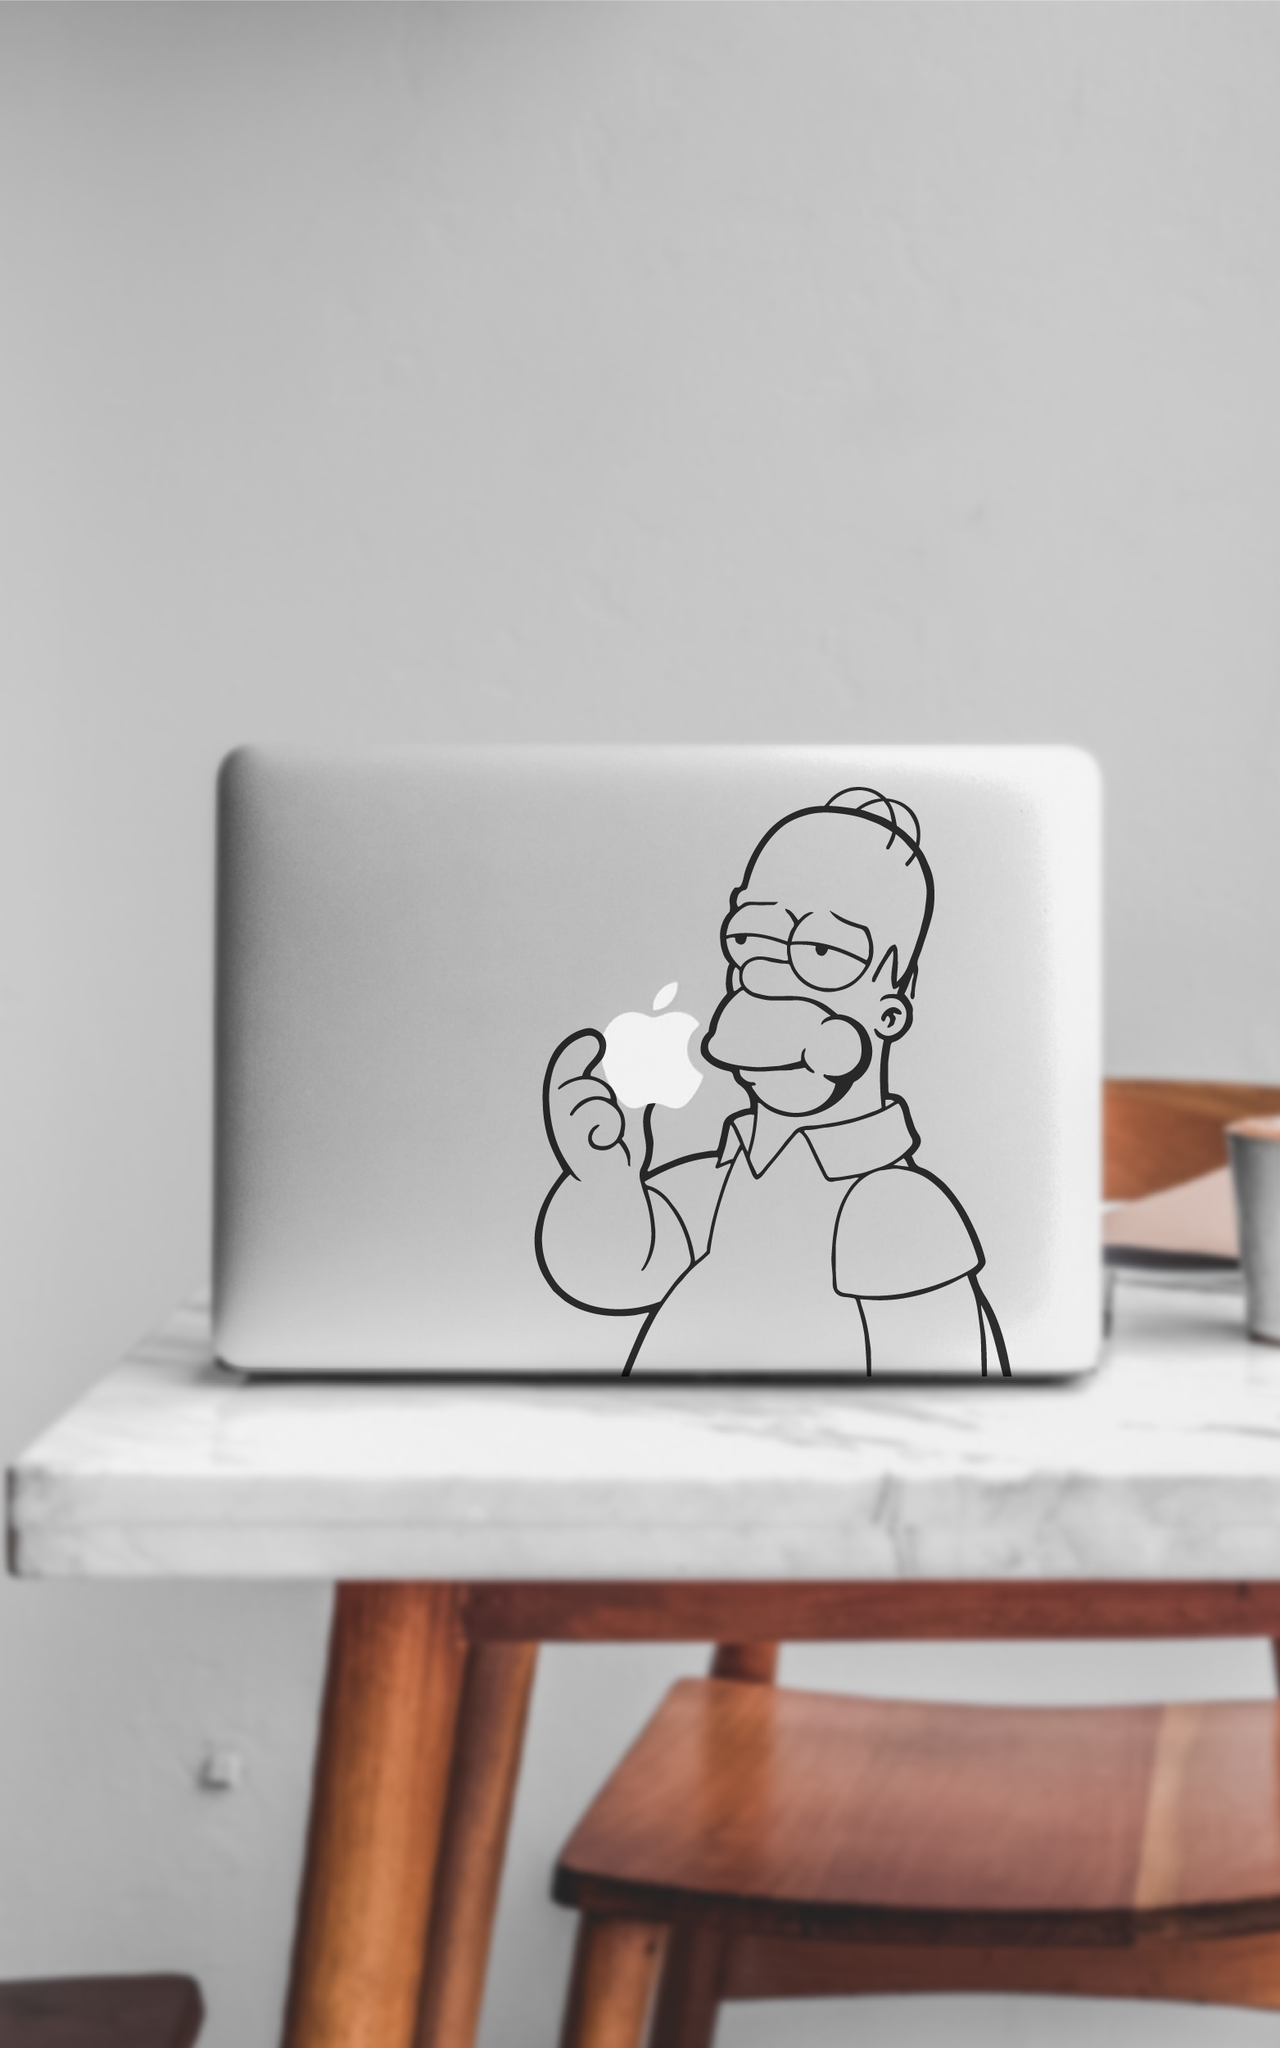 LondonDecal - Vinyl Decals & Stickers for your Macbook/Laptop